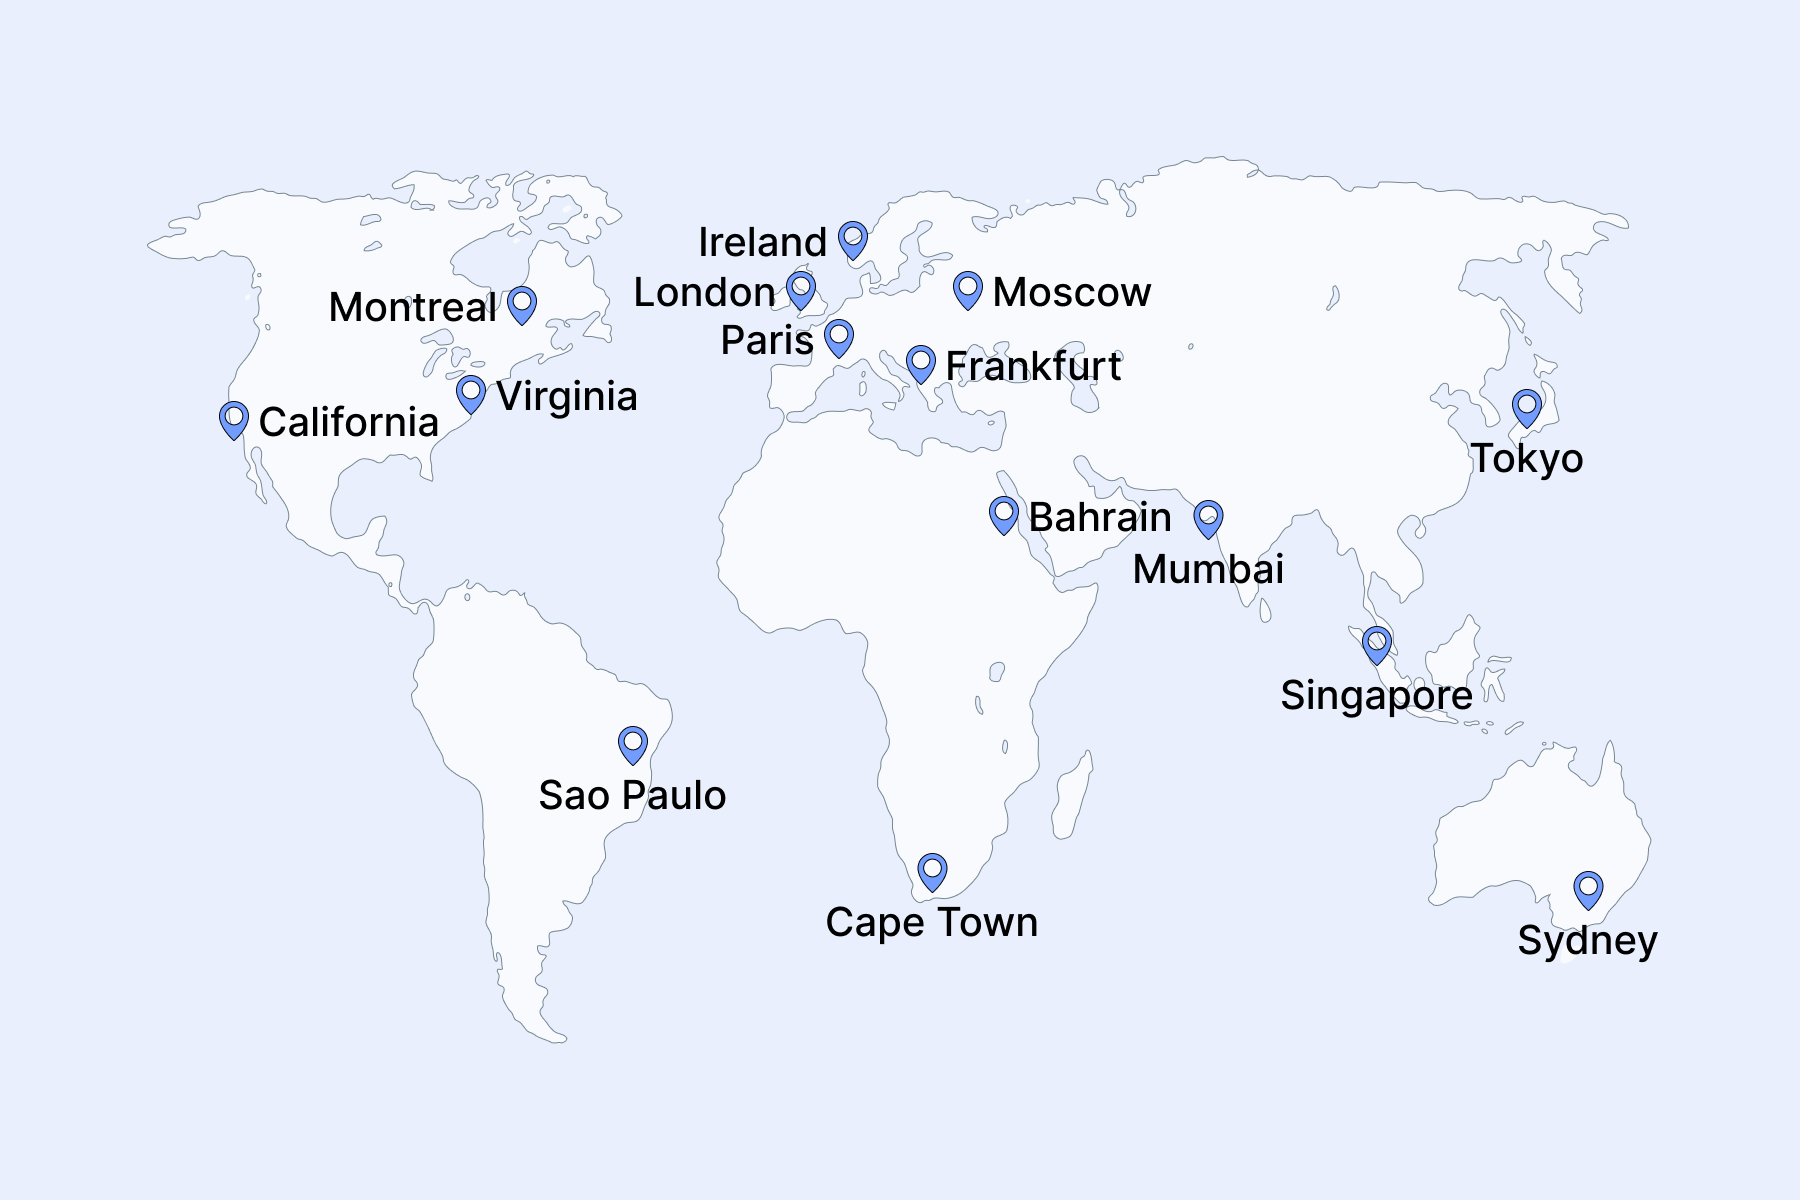 Geography of SCALESTA data centres